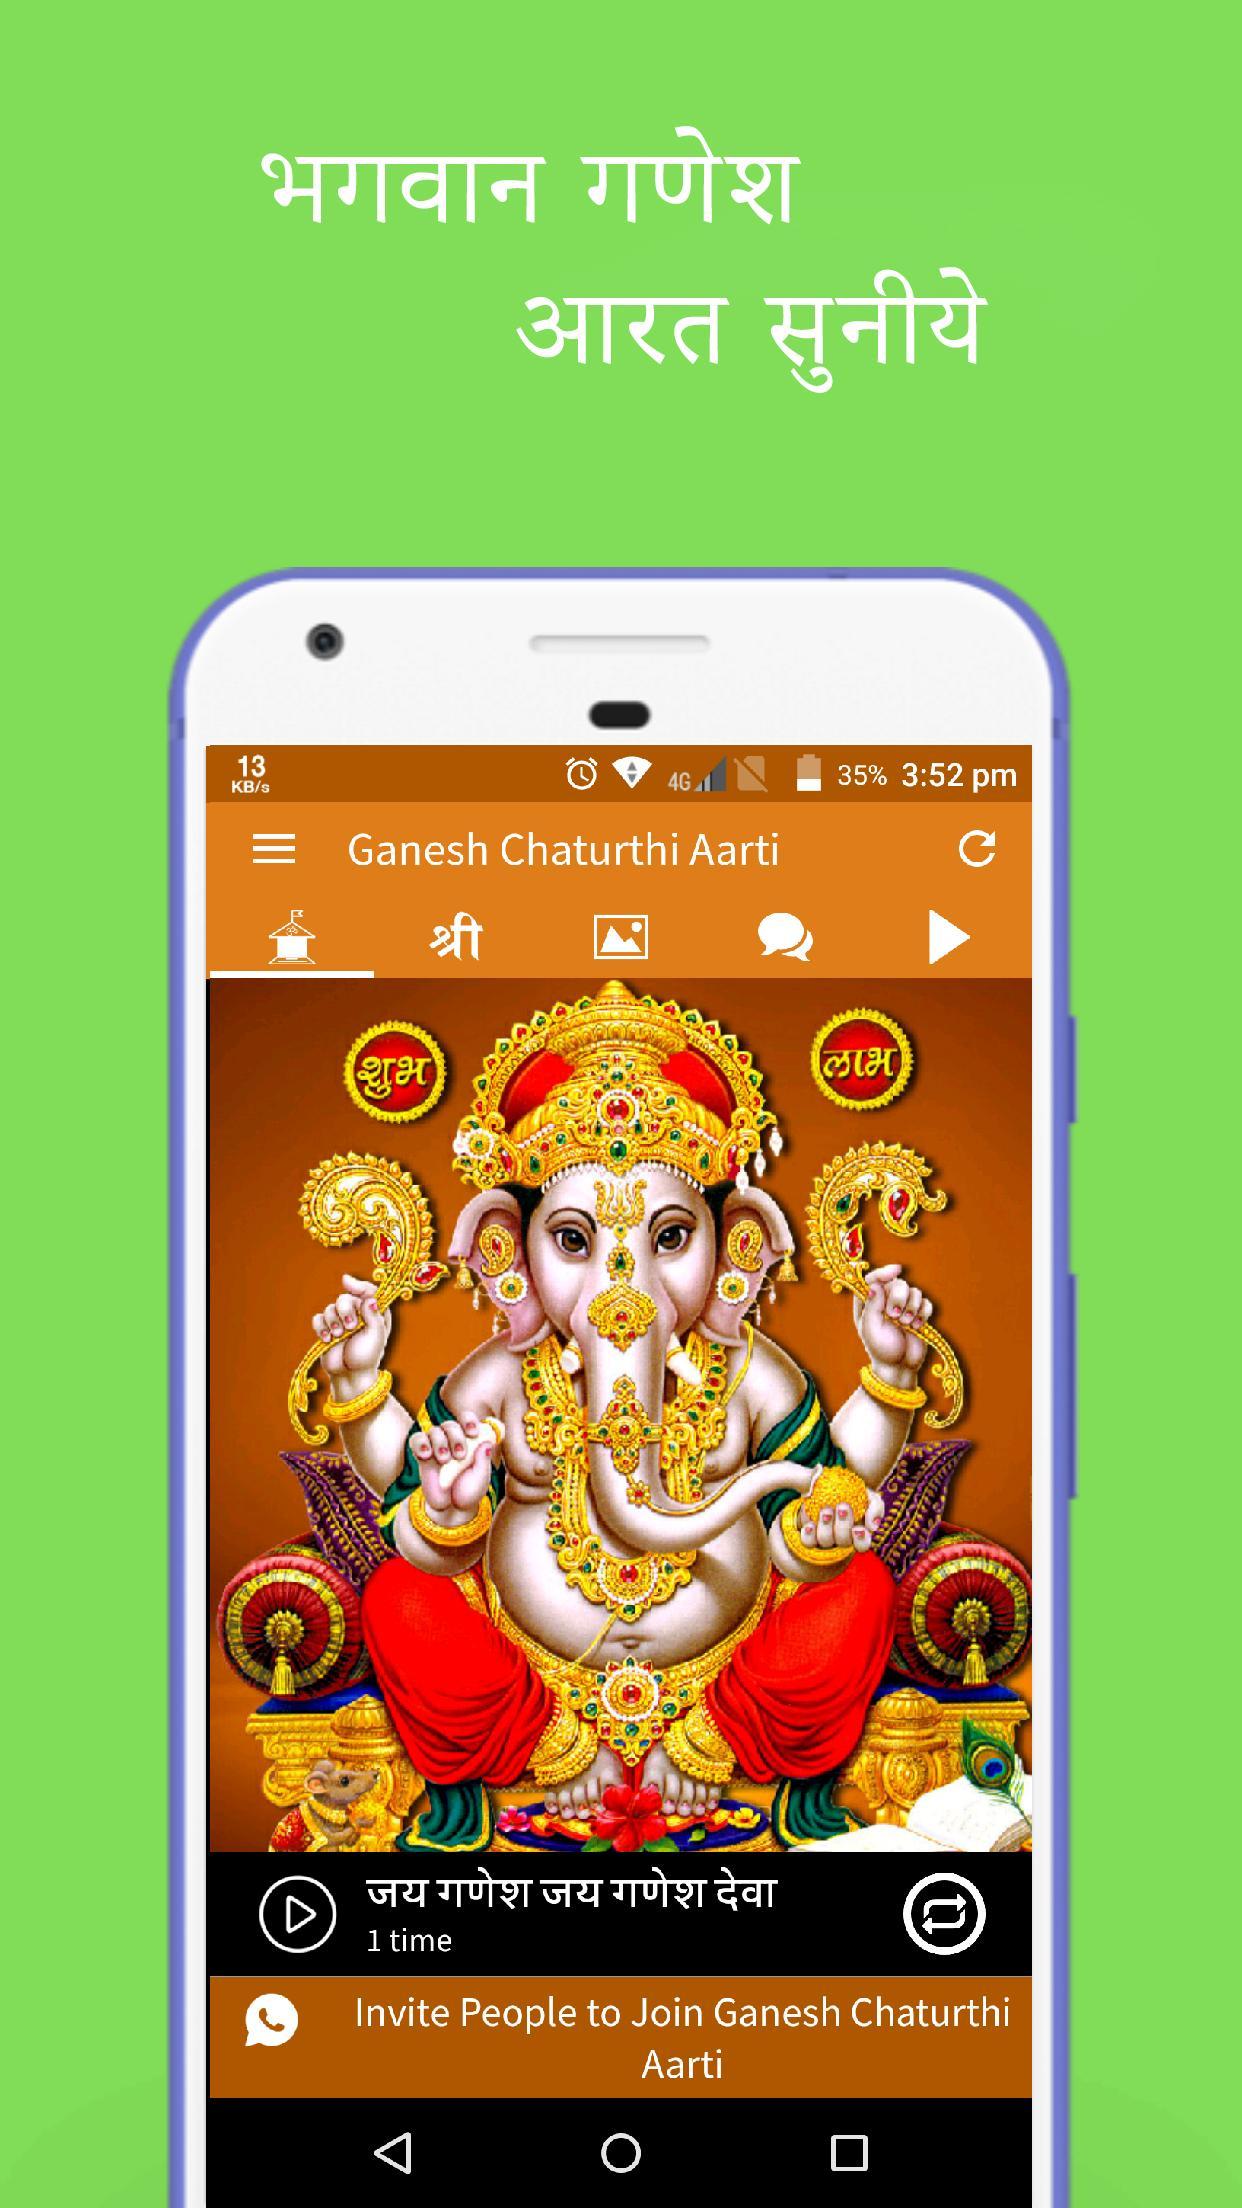 Ganesh Chaturthi 2018 Lord Ganapati Aarti Mantra For Android Apk Download